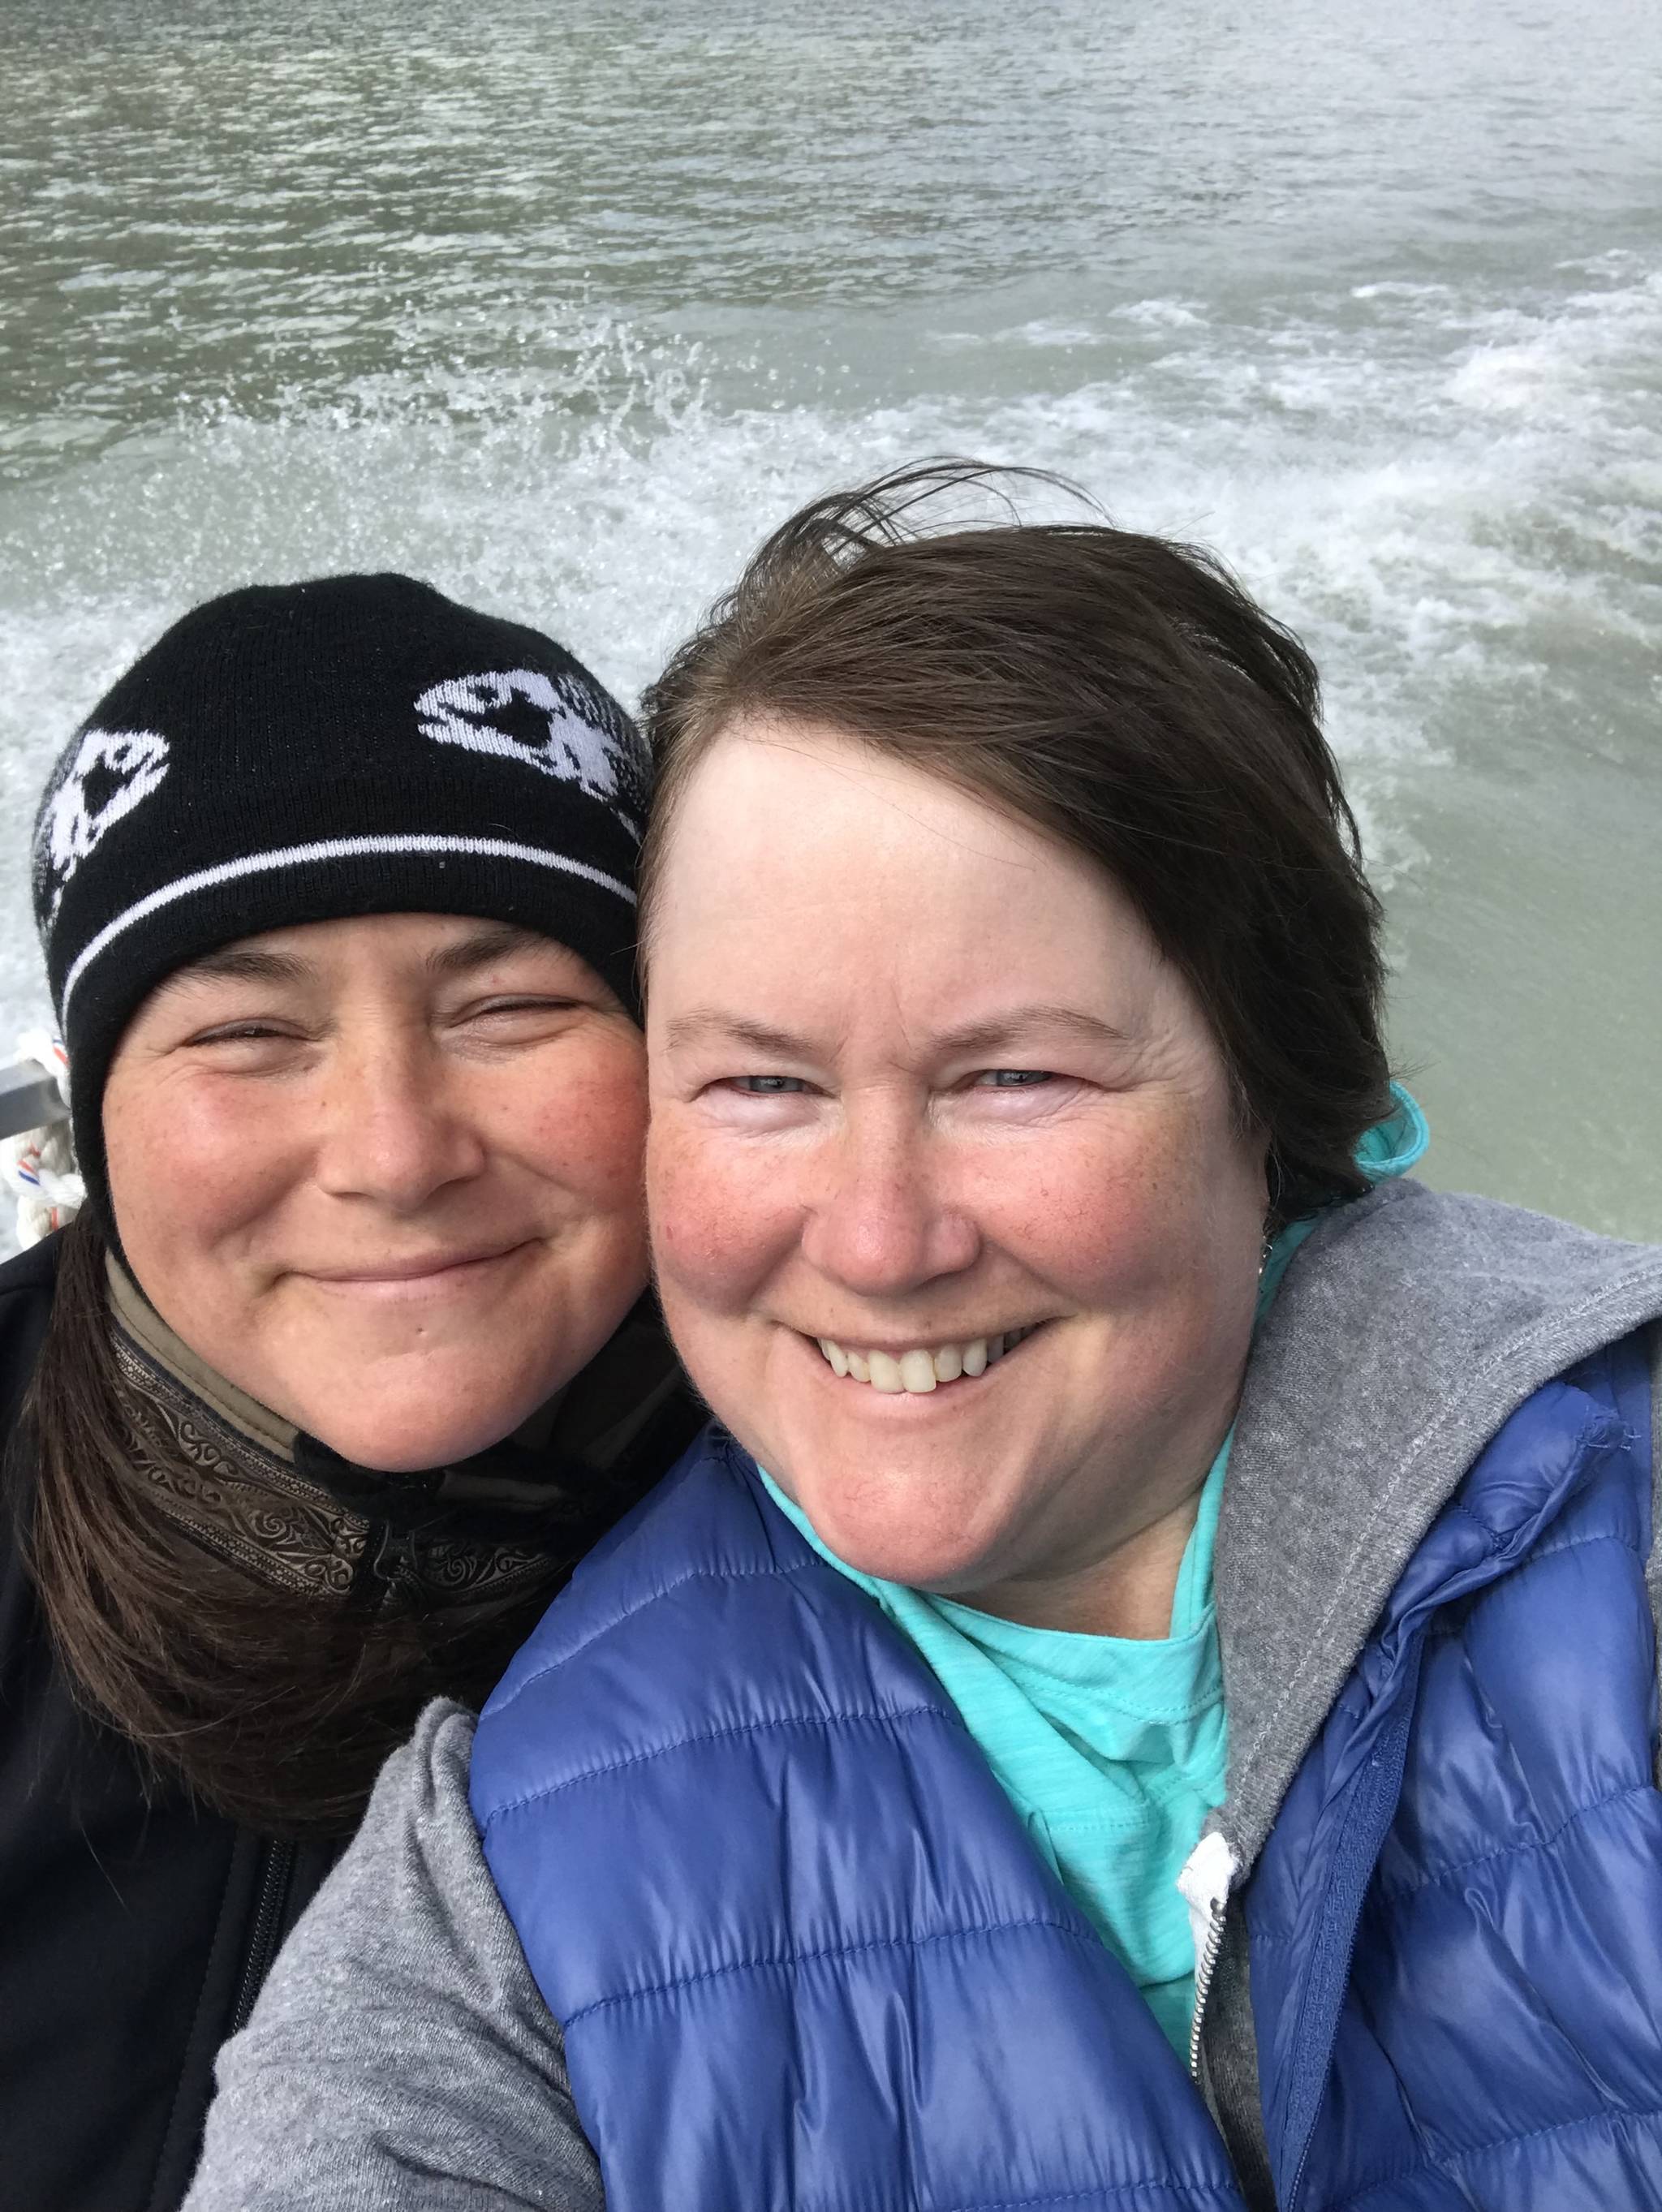 Vivian Faith Prescott, right, and her daughter Vivian Mork Yeilk’, left, smile while riding on the Stikine River. (Vivian Faith Prescott | For the Capital City Weekly)